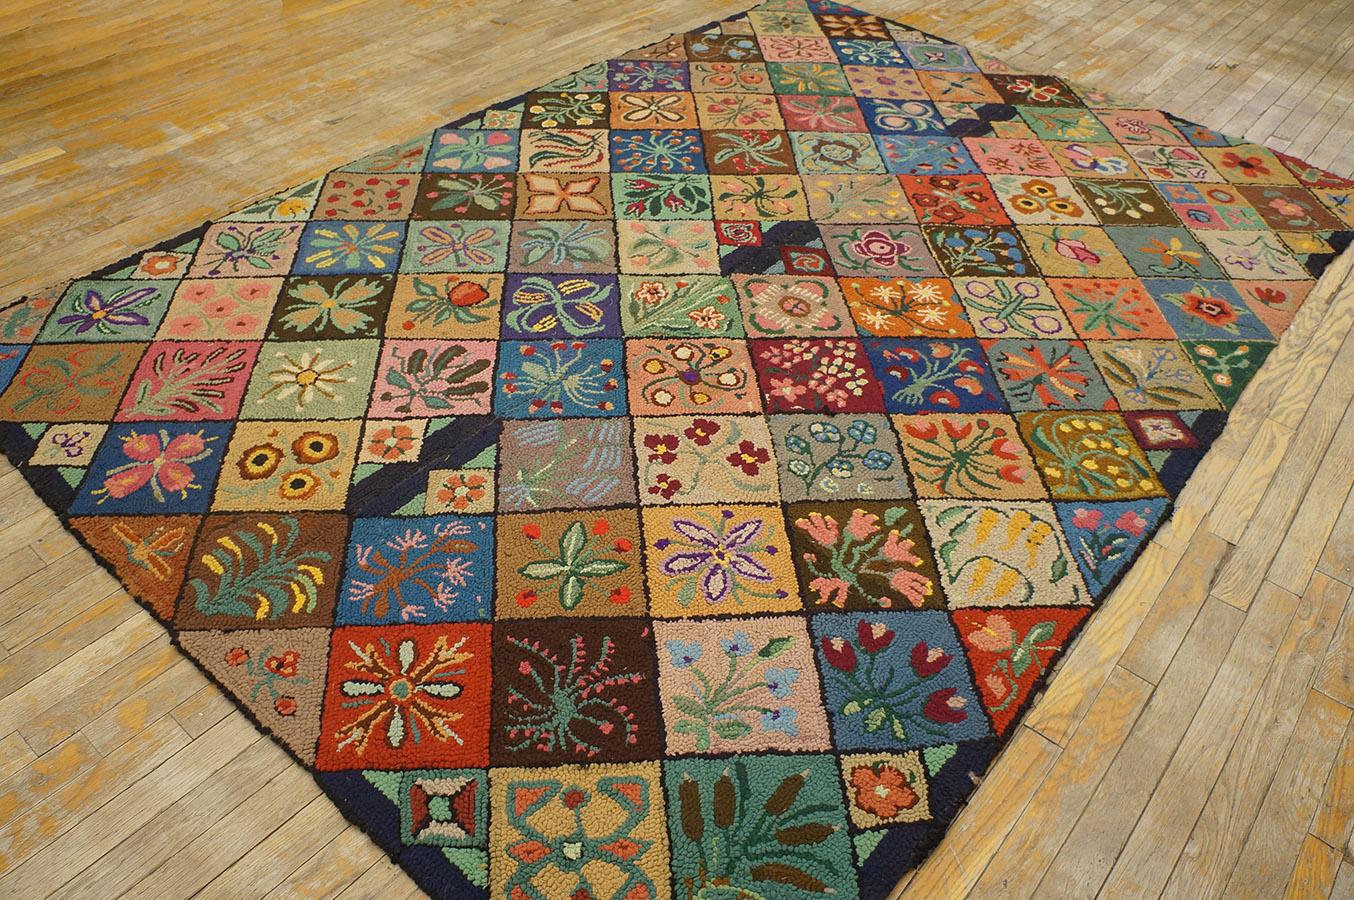 Hand-Woven 1930s American Hooked Rug ( 6' x 8'9